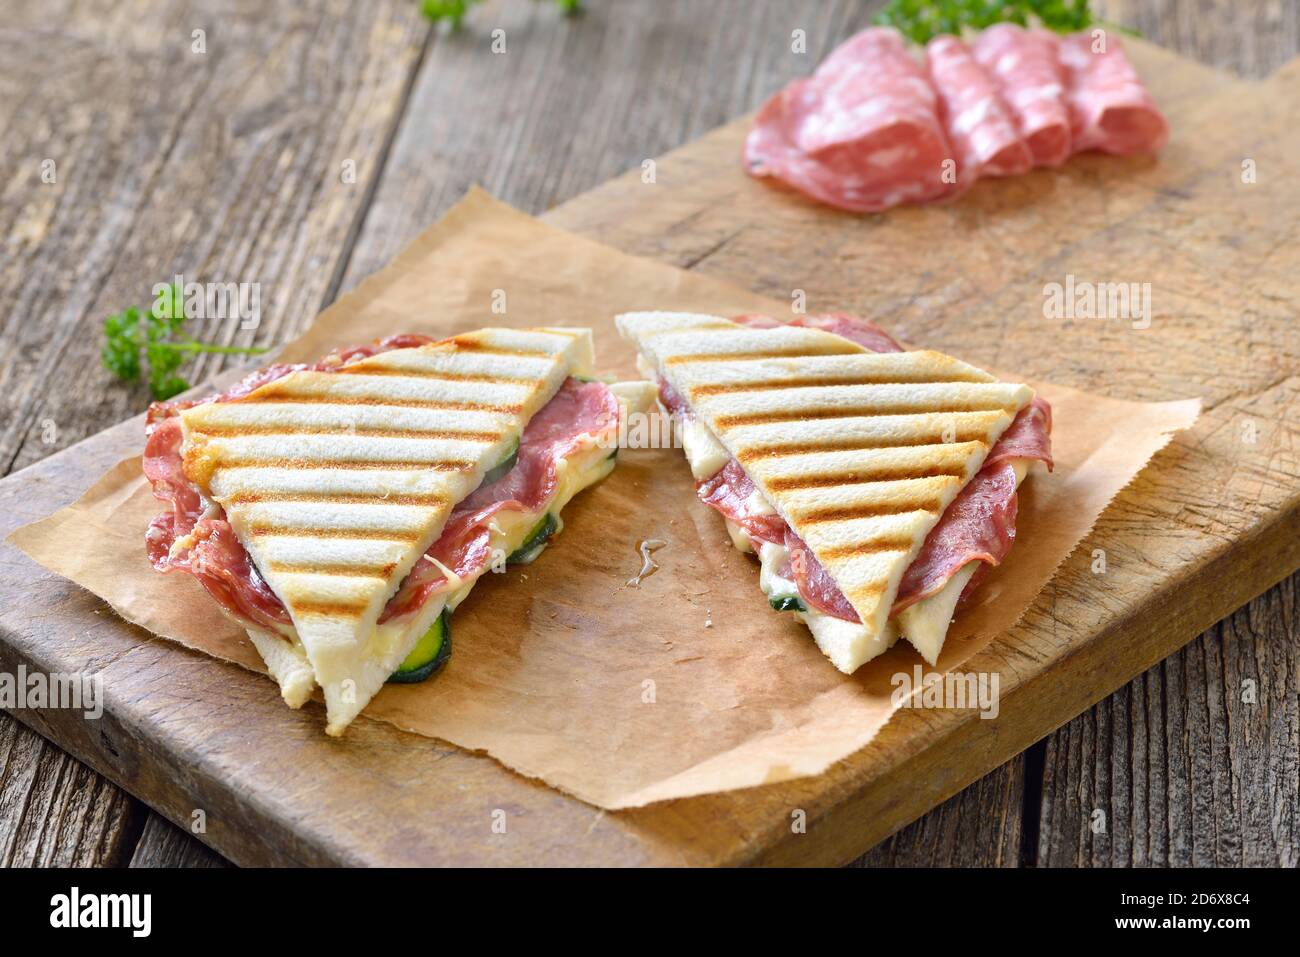 Pressed and toasted double panini with Italian salami and cheese served on sandwich paper on a wooden table Stock Photo